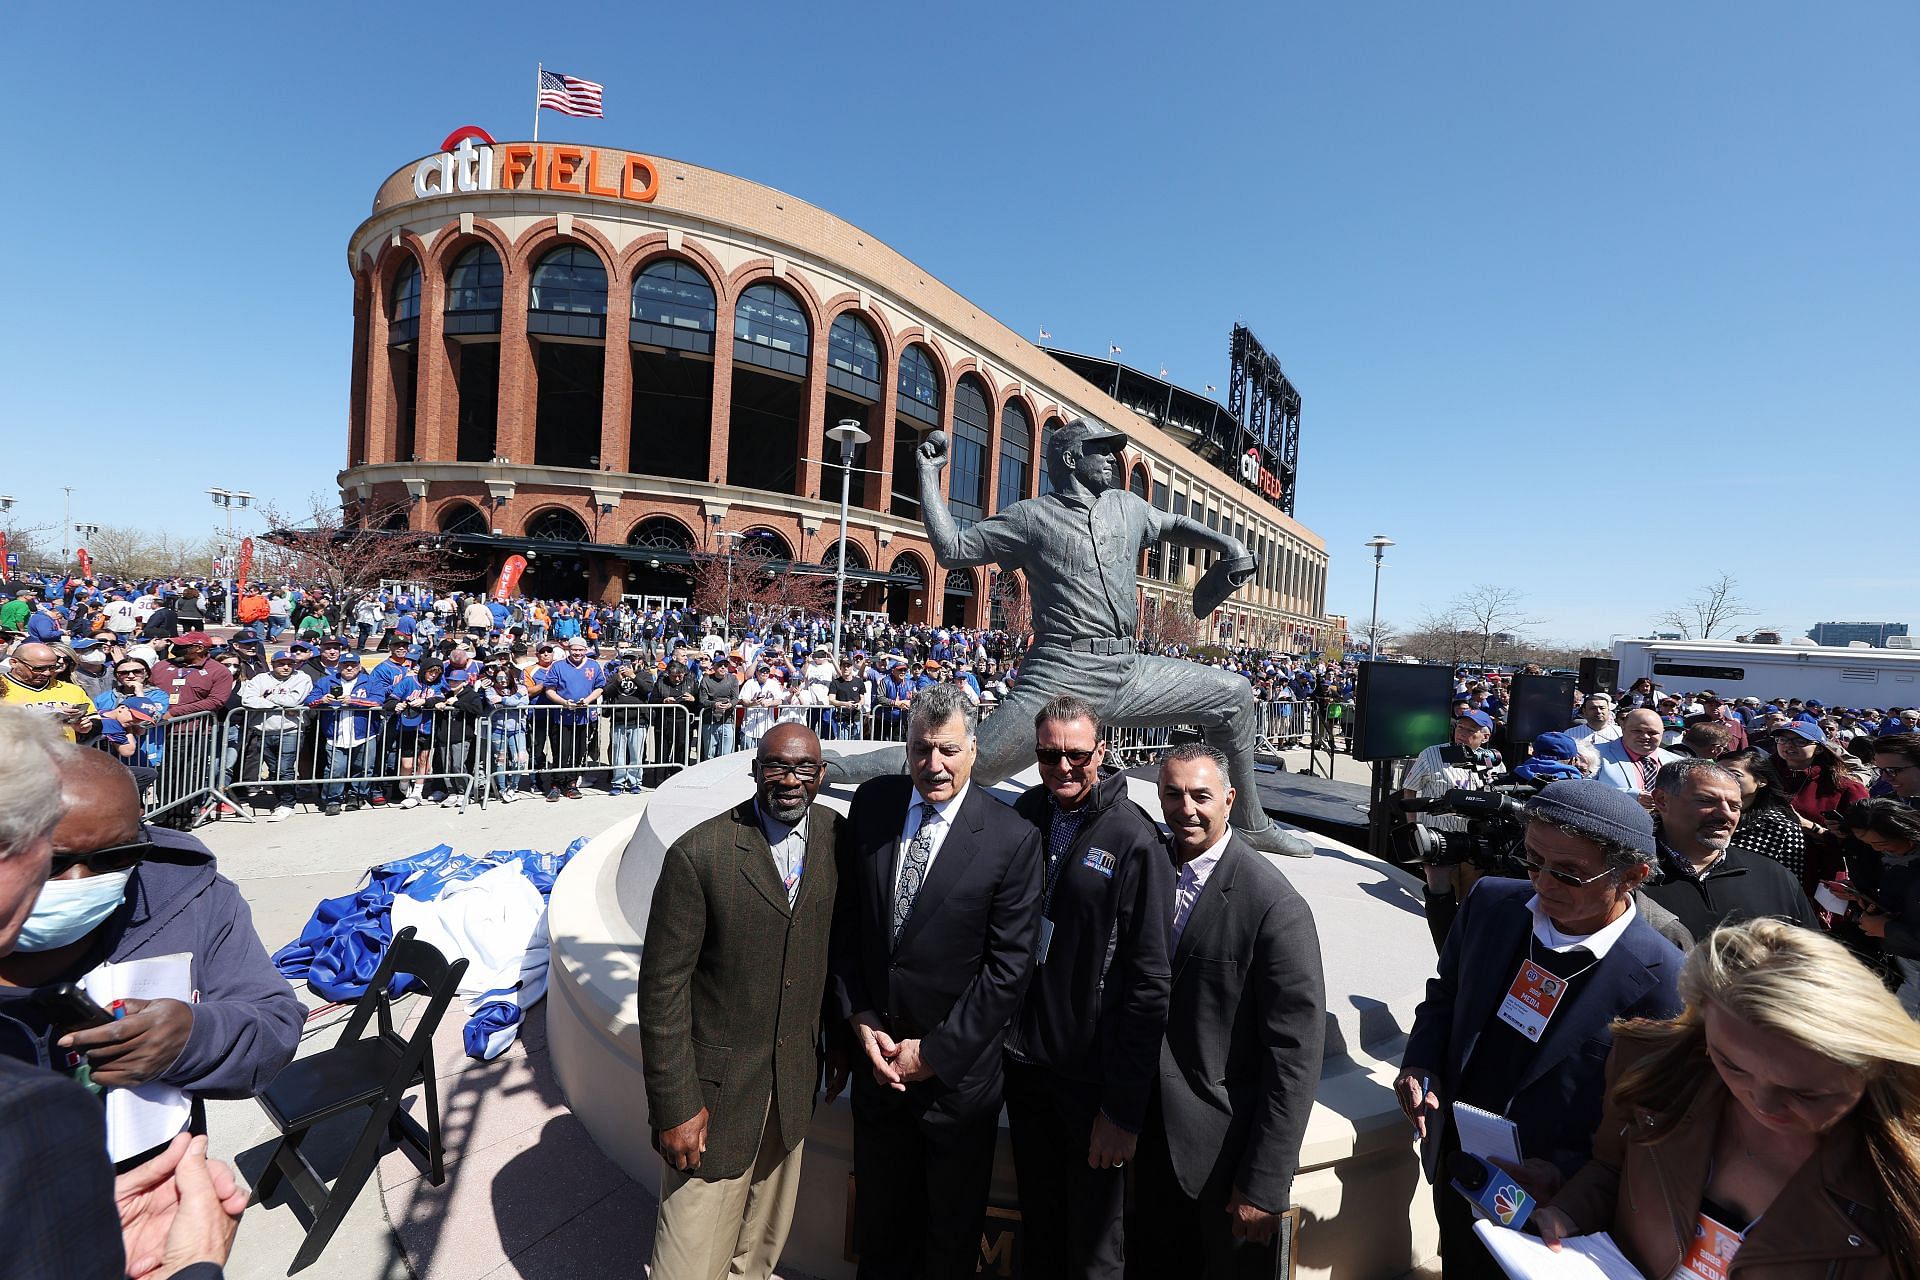 Former New York Mets L-R Mookie Wilson, Keith Hernandez, Tim Teufel, and John Franco pose in front of the Tom Seaver Statue at Citi Field